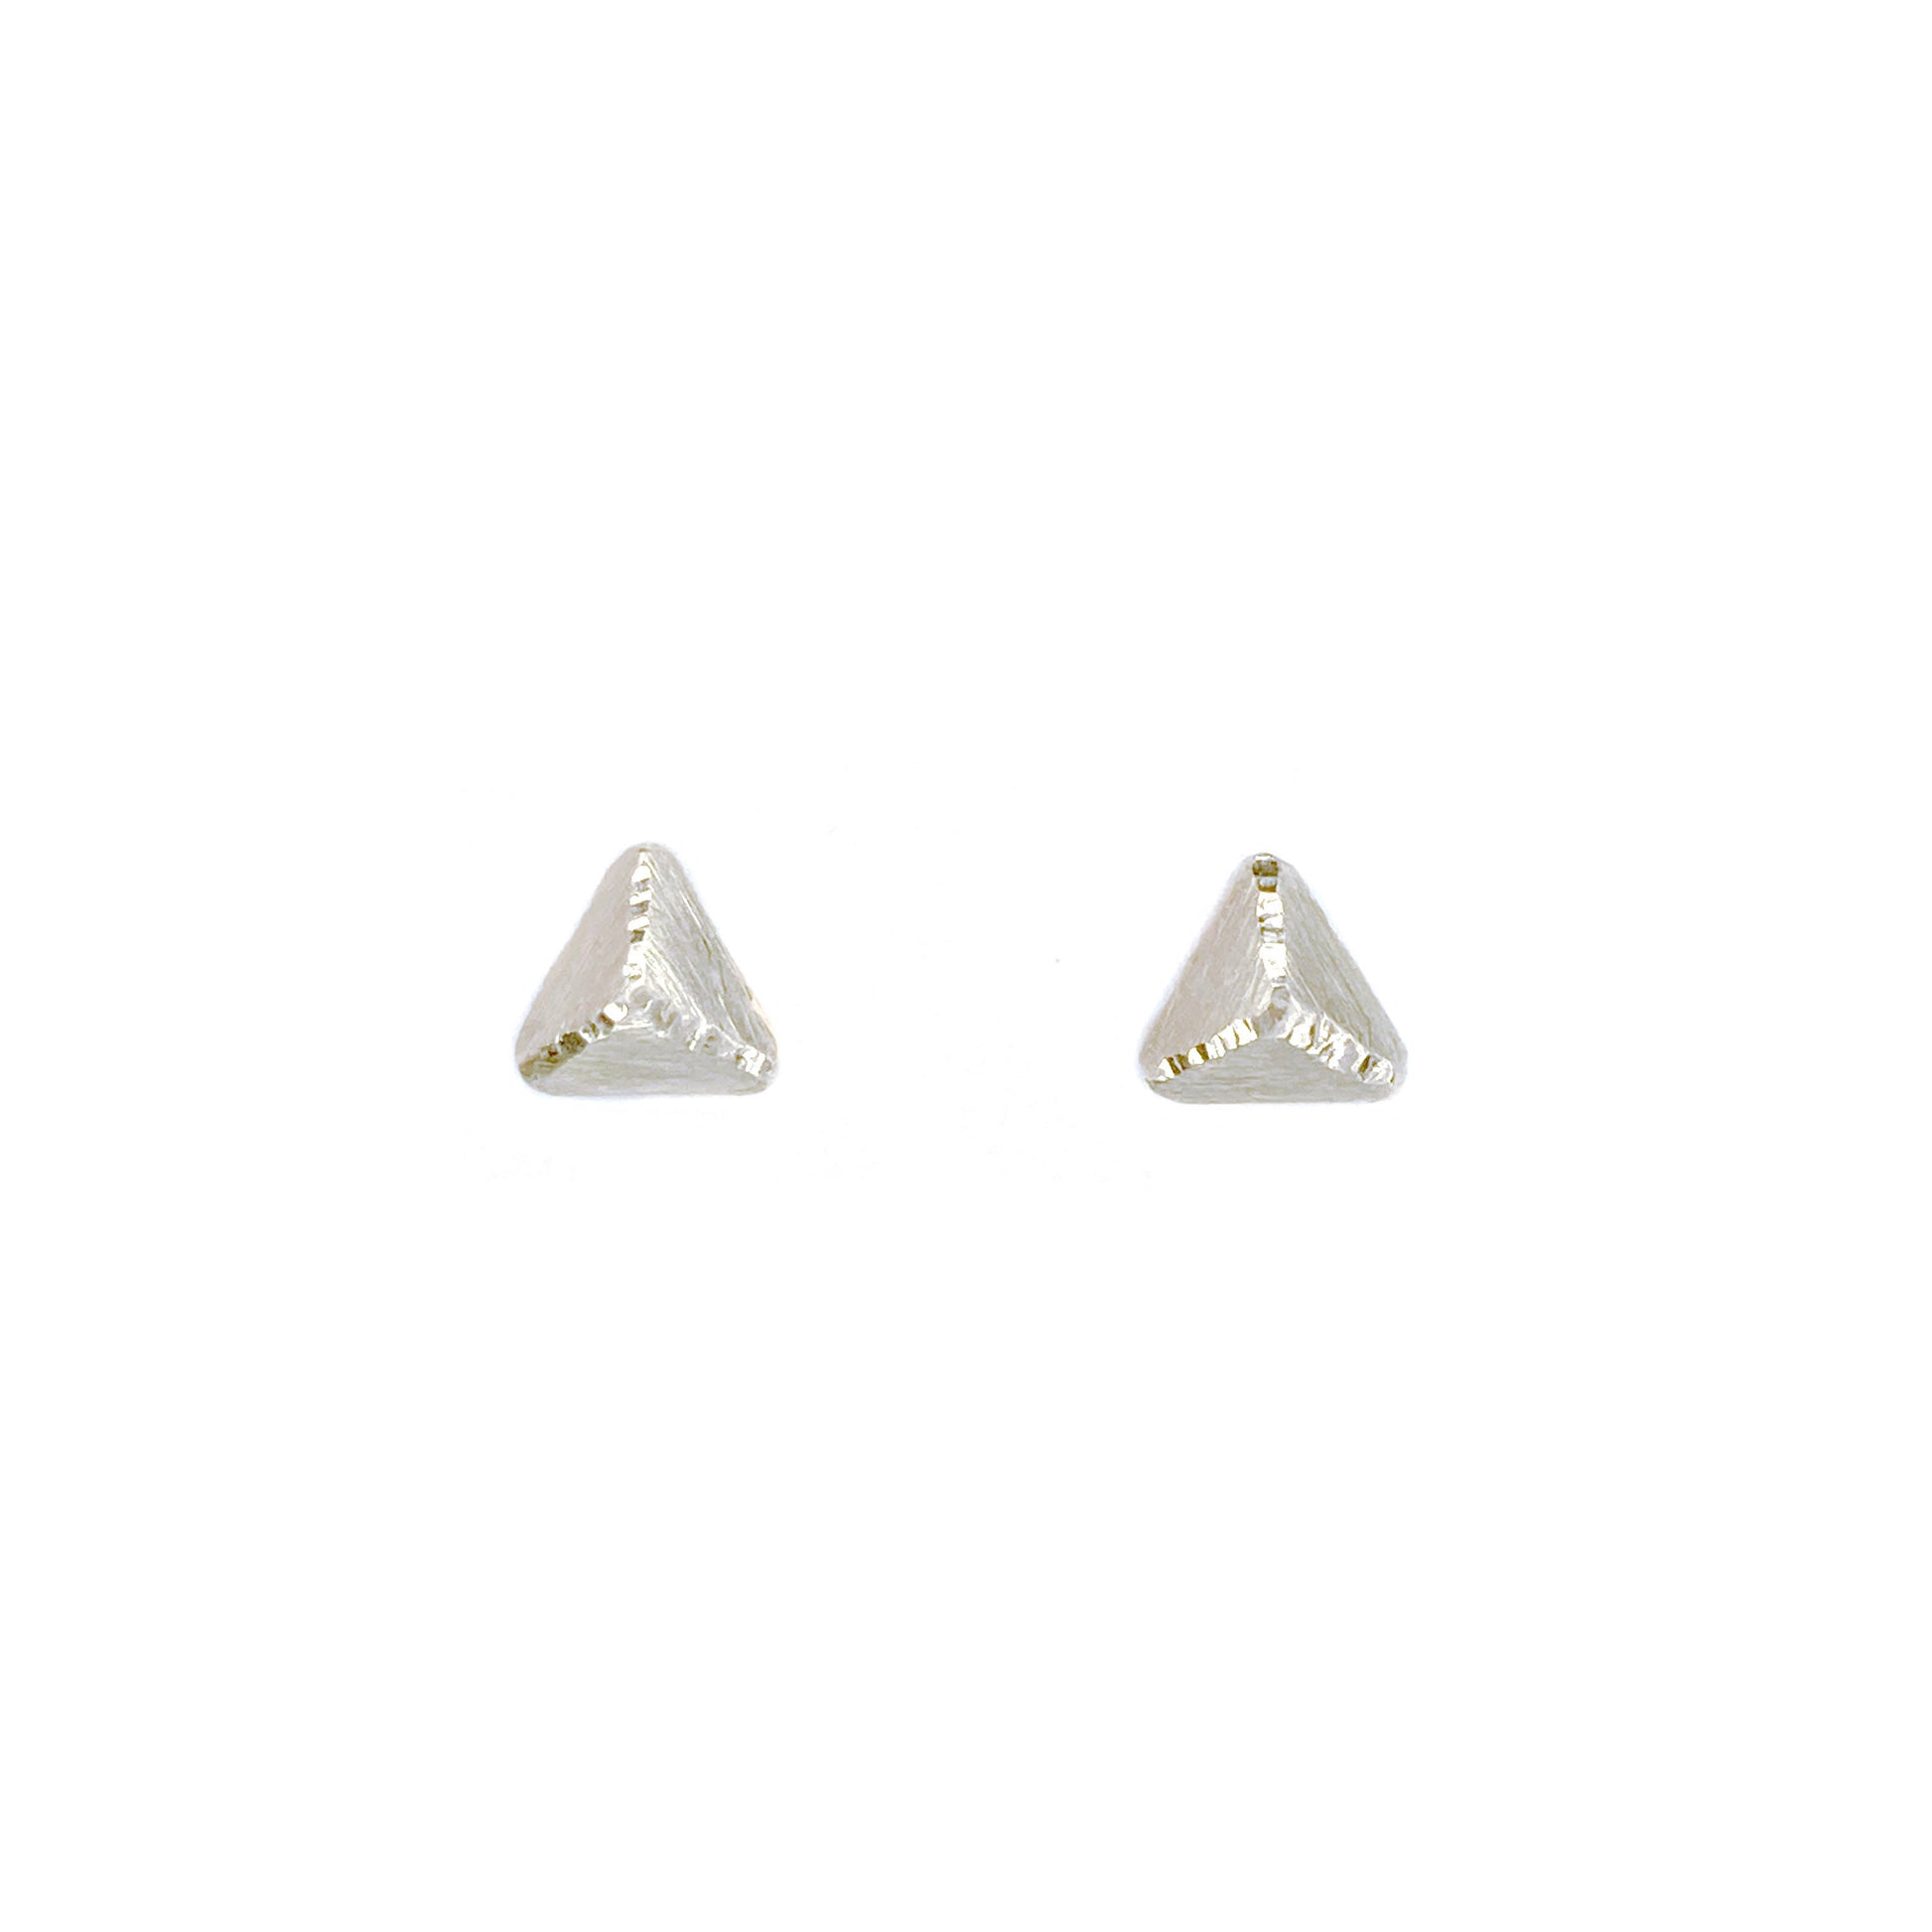 Tiny pyramid shaped stud earrings in silver